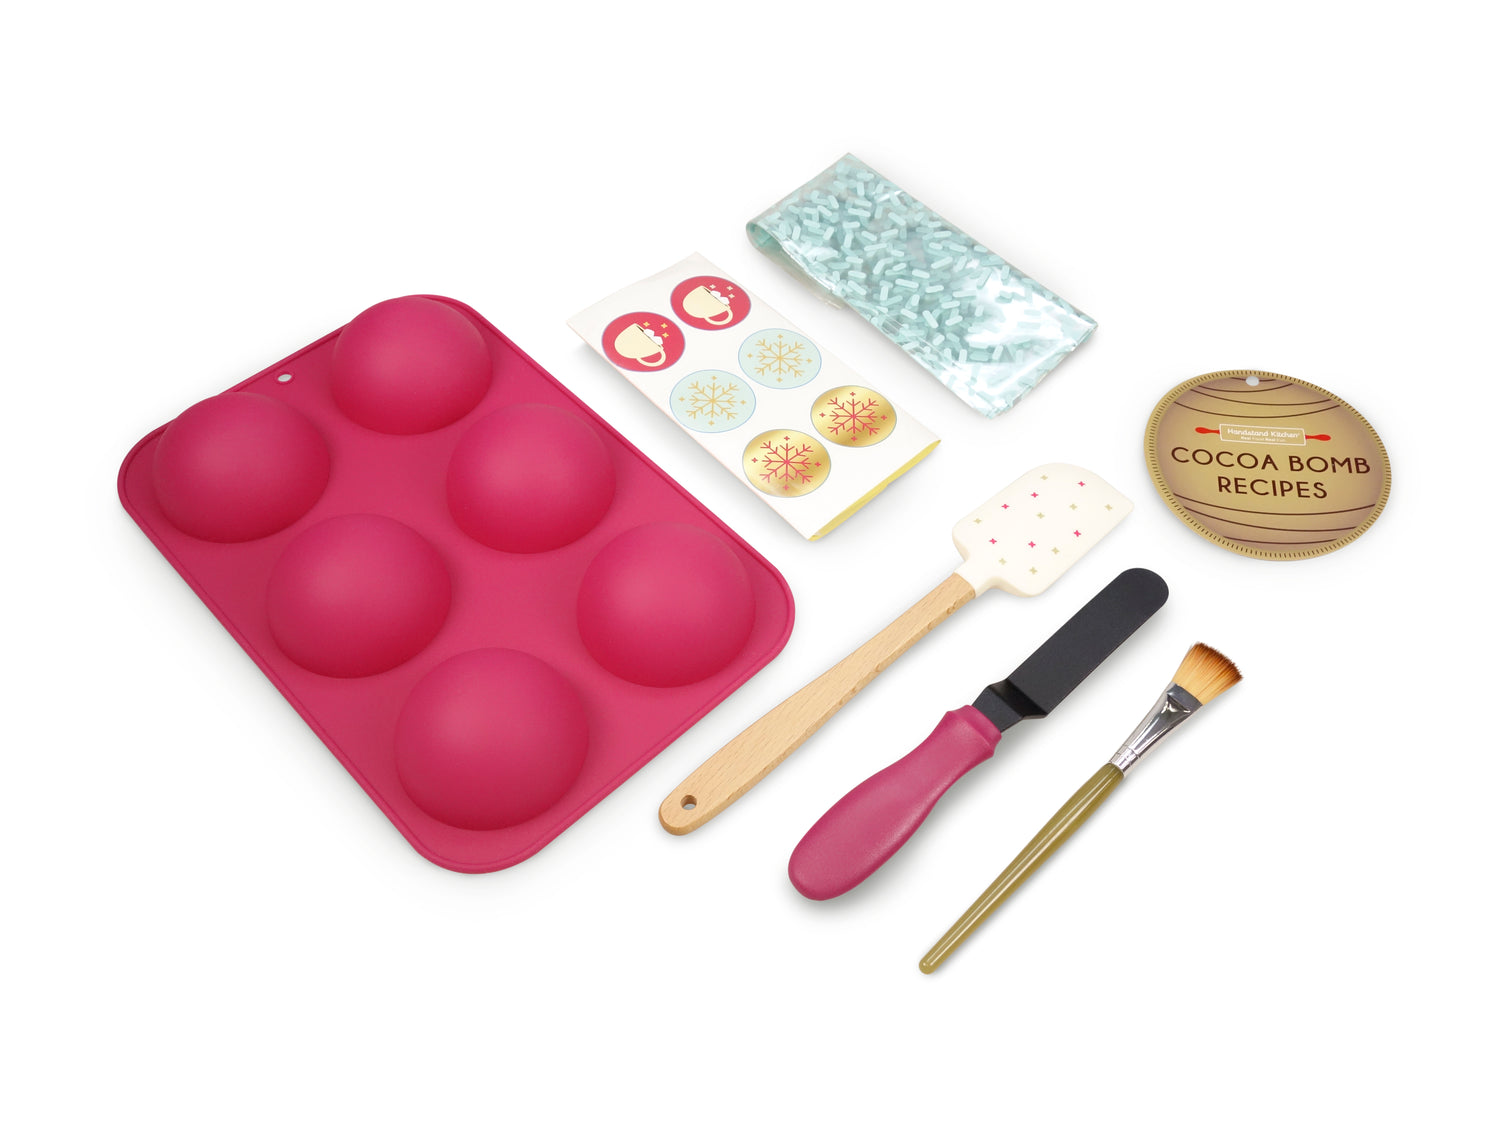 Out of box image of Make your own Hot Cocoa Bomb set including:1 silicone mold to make 3 cocoa bombs, 1 spatula, 1 brush, 1 scraper,  gift bags, stickers and recipes, plus QR code link to exclusive recipes and videos.